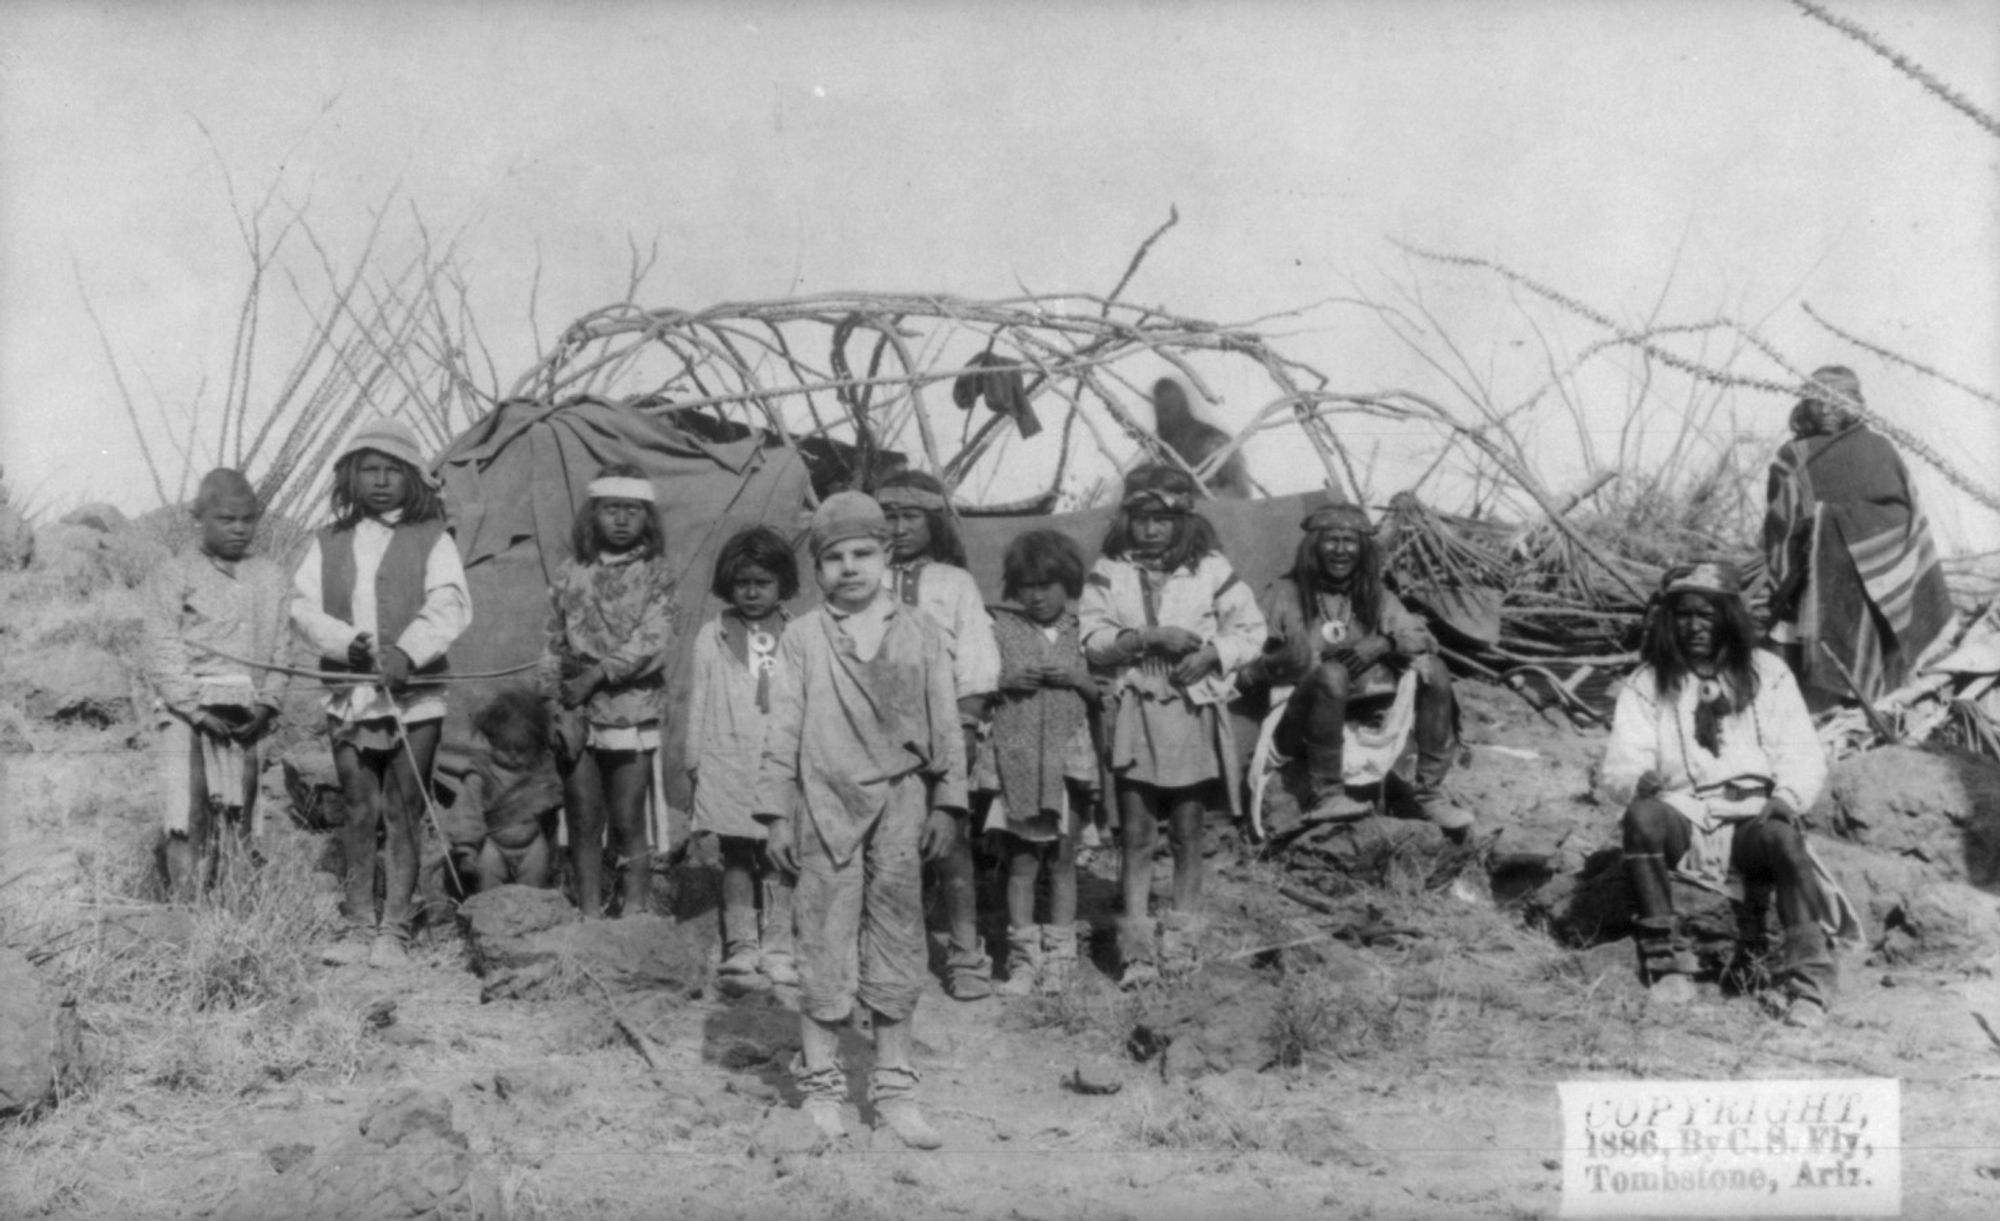 Women and children in Geronimo's camp during late March 1886. Shown in the photo is 11-year old Jimmy McKinn, who was abducted by the band. He had been kidnapped in September 1885, and "fiercely resisted" returning to his parents despite the fact that the same Apaches had killed his brother. It was reported in more than one newspaper that he had been "fully Indianized."